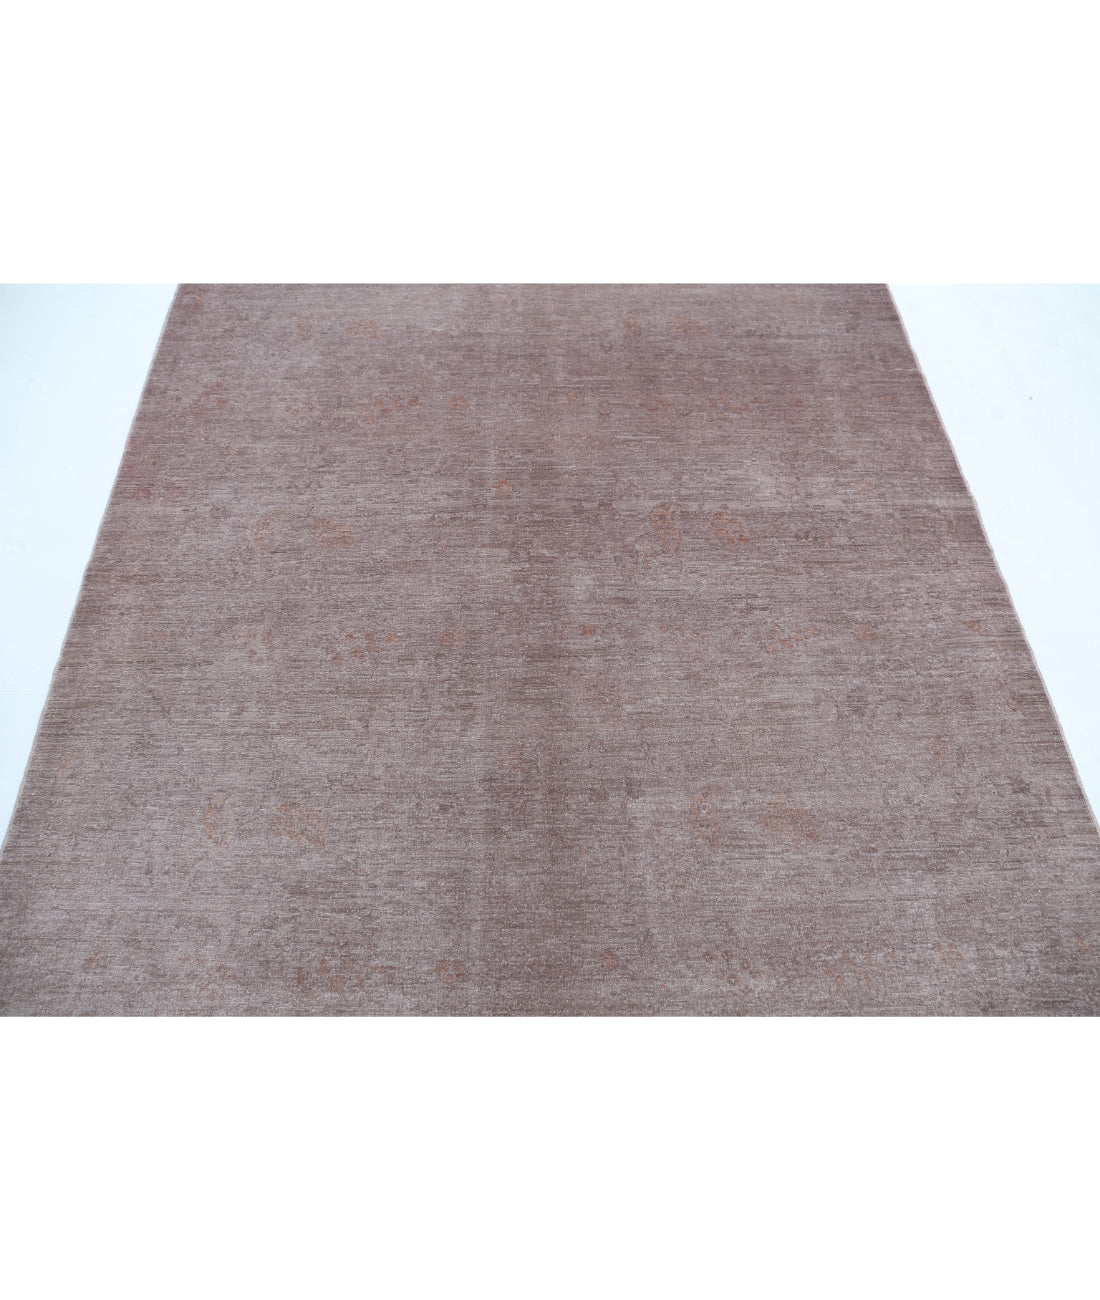 Hand Knotted Overdye Wool Rug - 5'10'' x 6'6'' 5'10'' x 6'6'' (175 X 195) / Taupe / Taupe